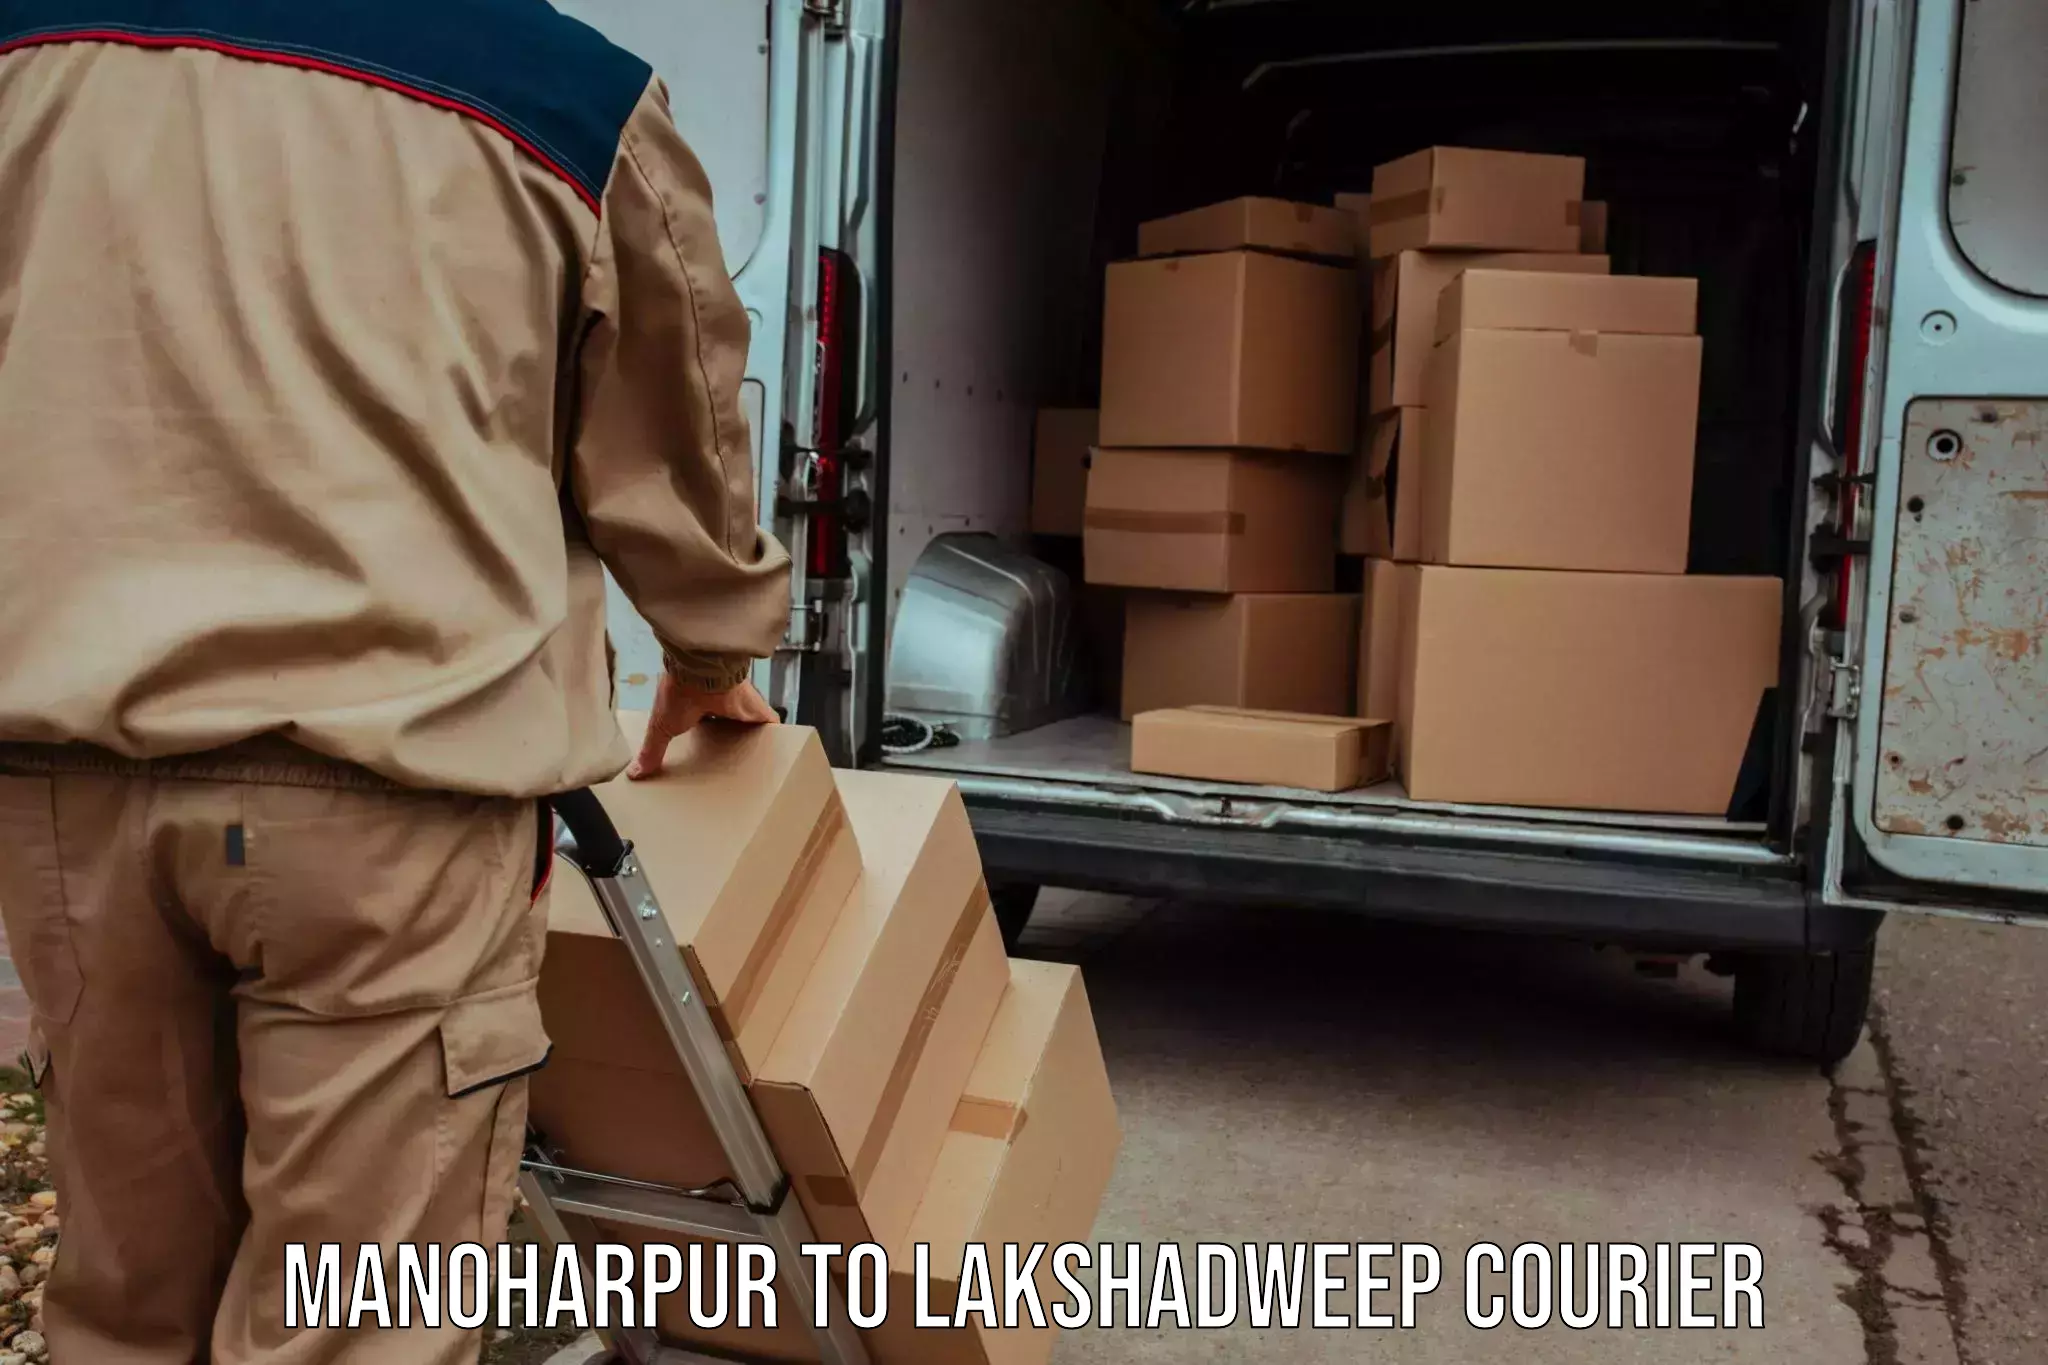 Enhanced tracking features Manoharpur to Lakshadweep